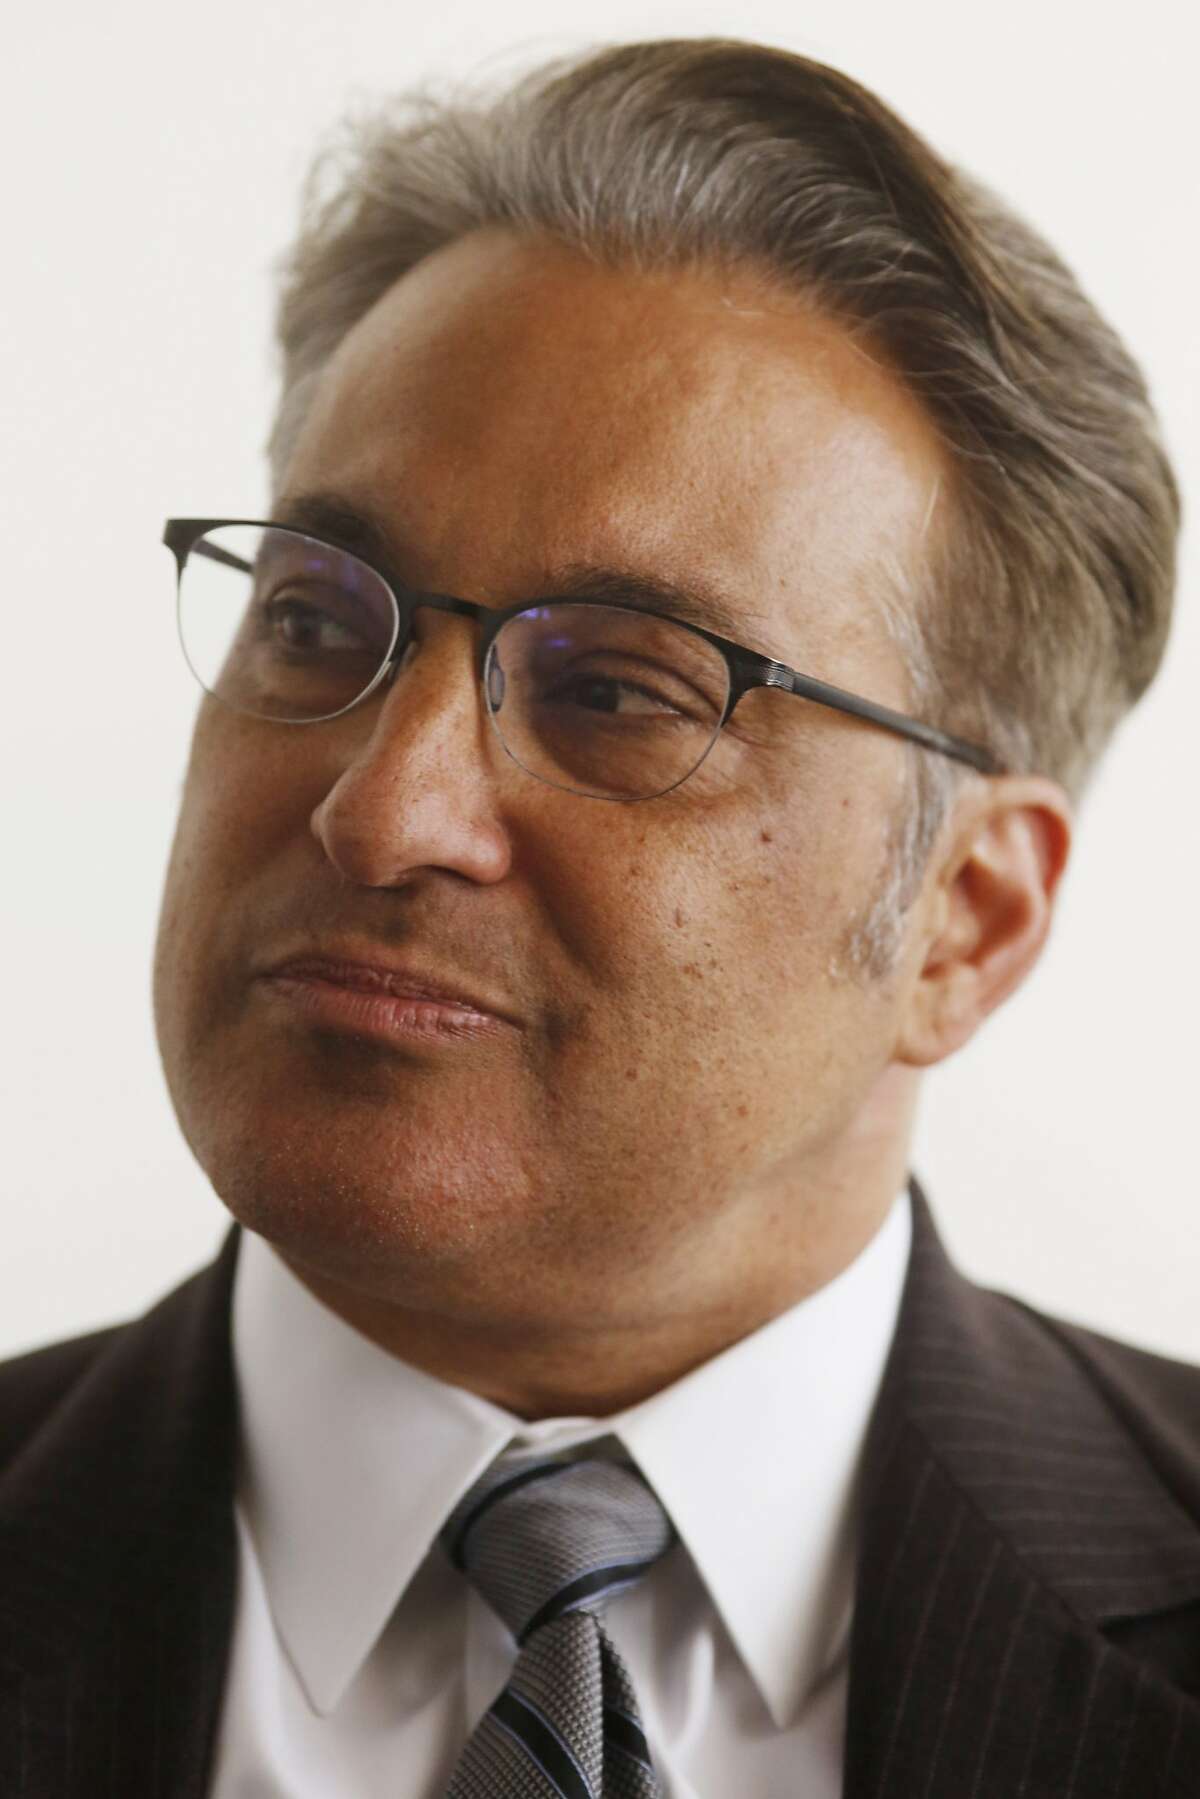 San Francisco City and County Sheriff Ross Mirkarimi talks about new sewing class at the county jail on Monday May 11, 2015 in San Francisco, Calif. Sheriff Mirkarimi said he hopes classes like this will help bring a positive brand to San Francisco.